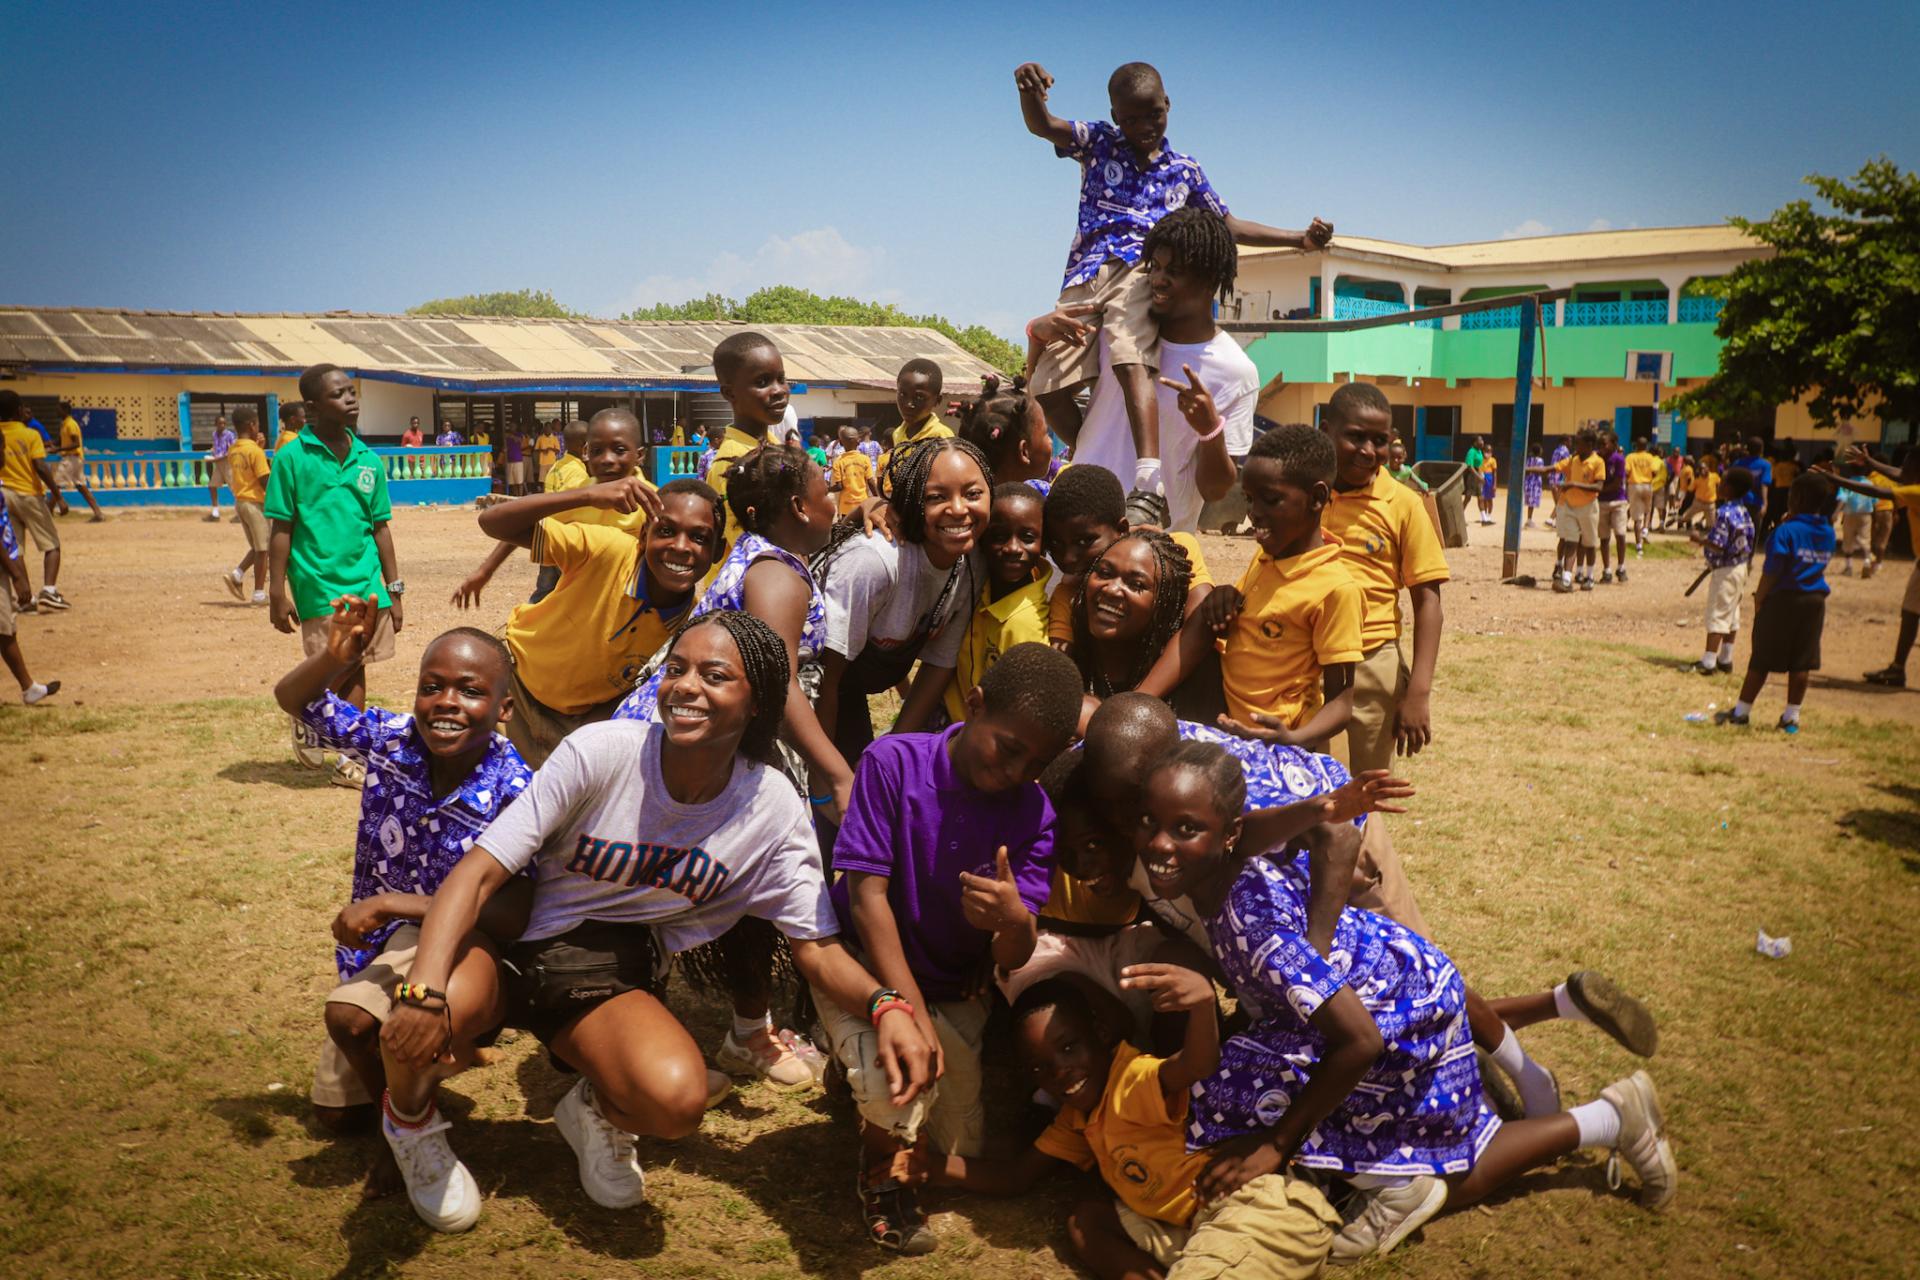 During their recess times, students of Kwame Nkrumah Memorial School hug and jump all over Howard Students as they pose. Students in the image include (from left to right): sophomore Veronika Victor, senior Tori Miller; junior Miah Powell, senior Eric January